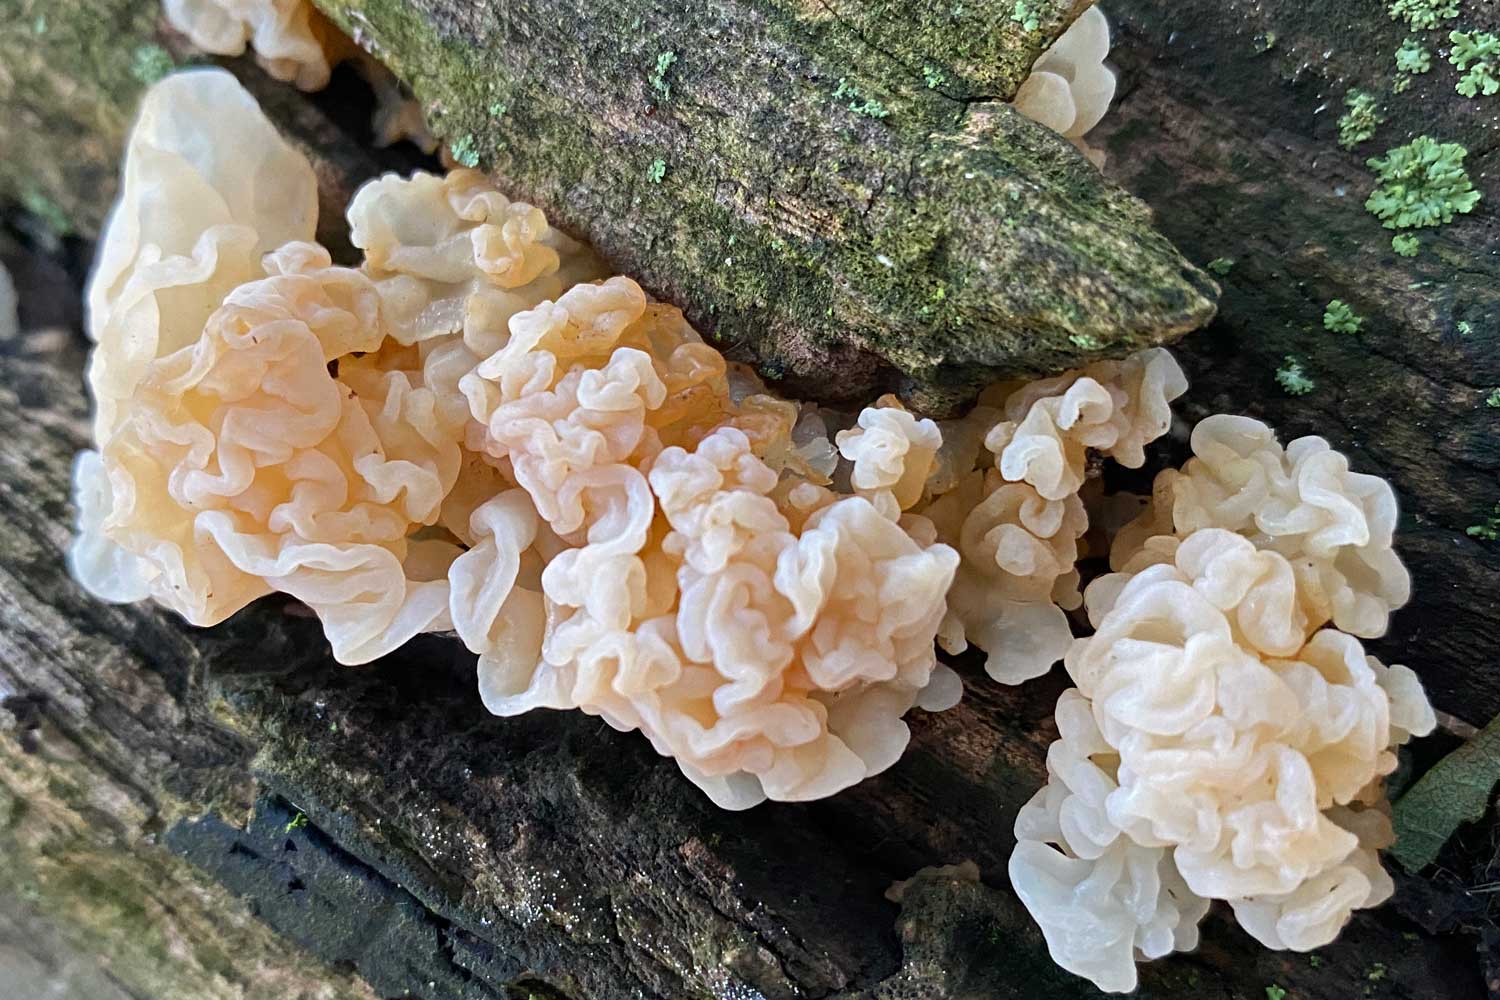 Jelly fungus on a downed tree.